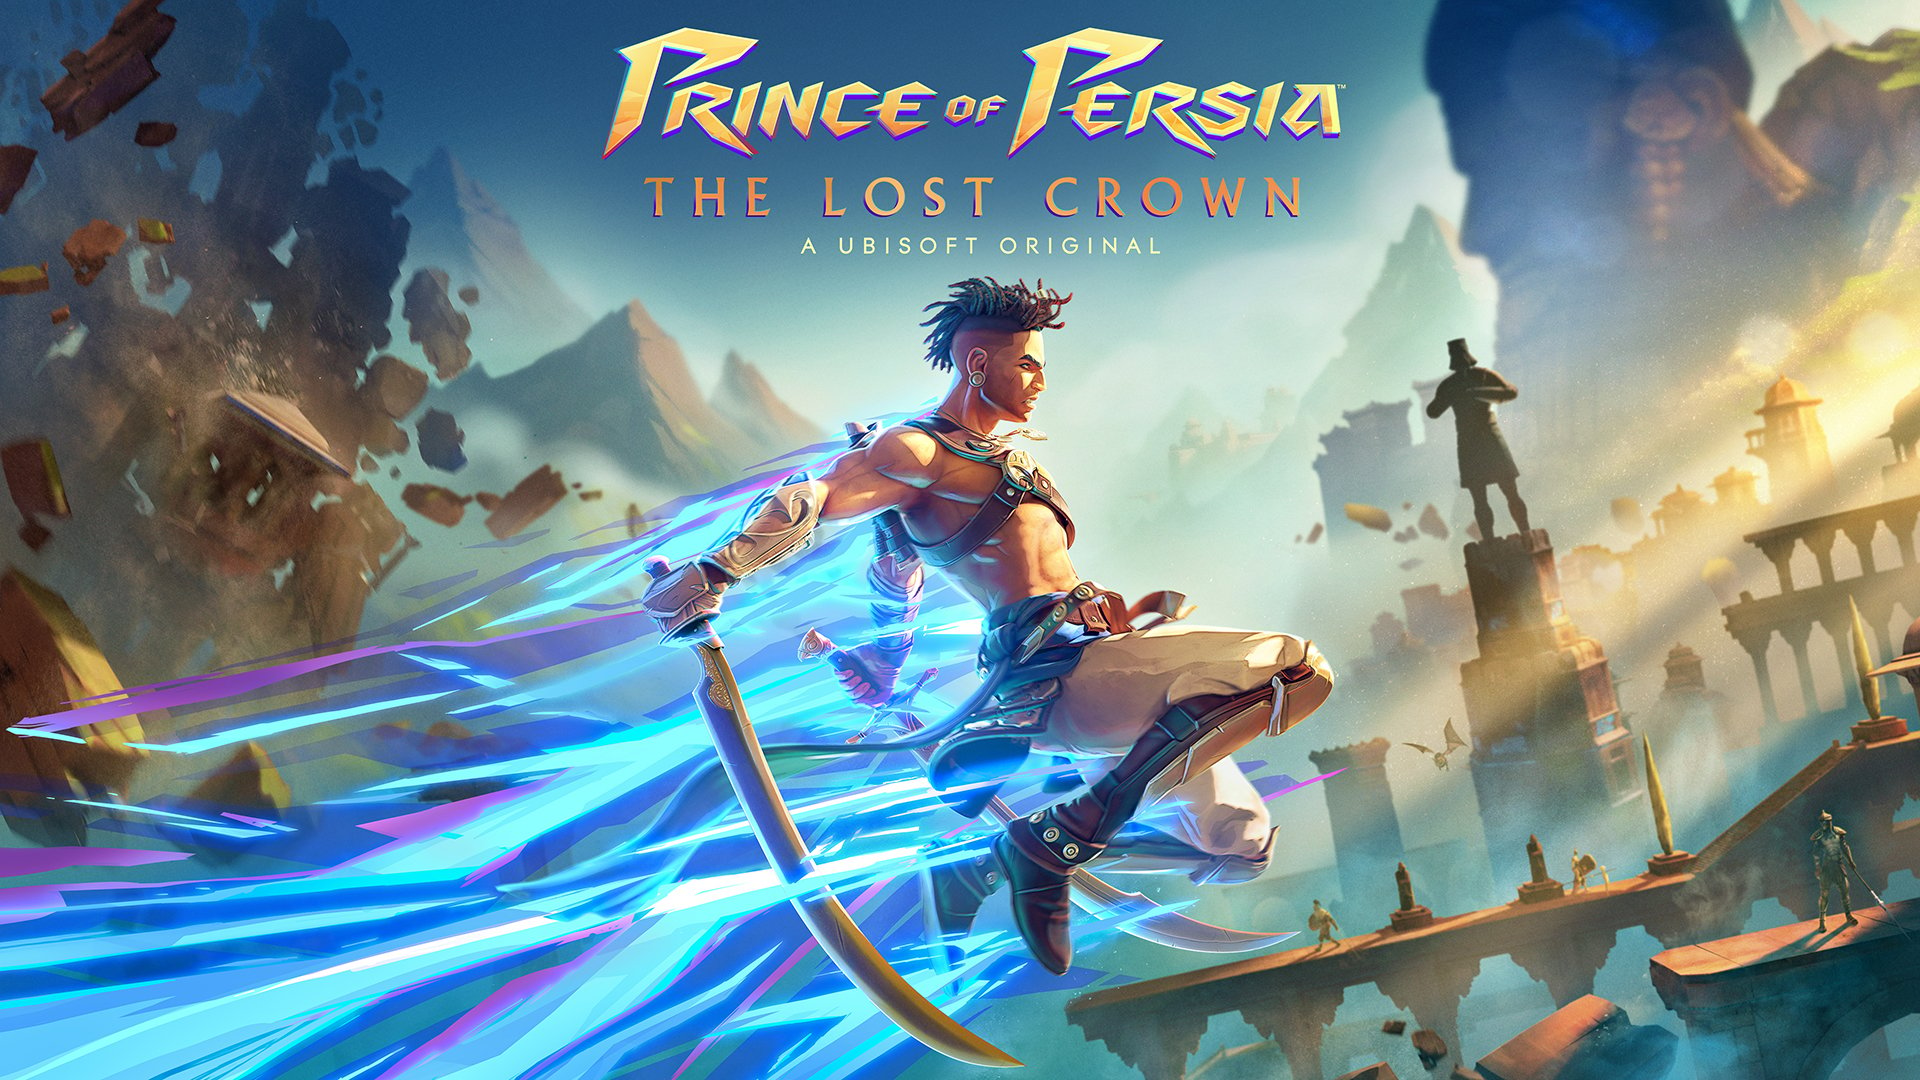 Can we talk about what we ACTUALLY dislike about Lost Crown? No historical  inaccuracy. : r/PrinceOfPersia